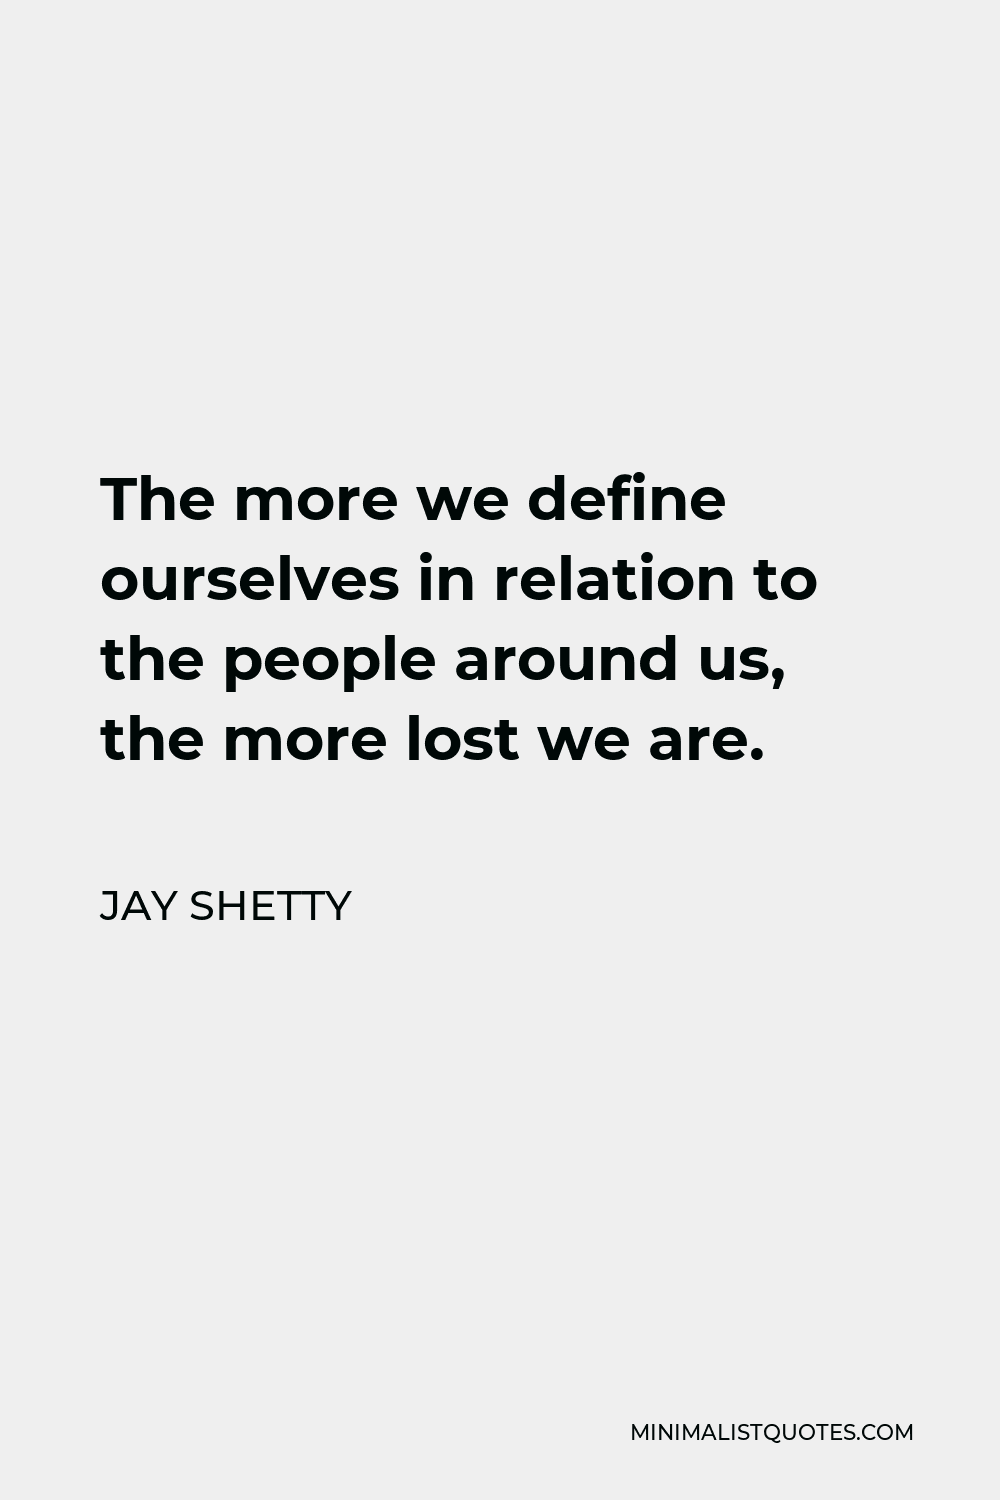 Jay Shetty Quote - The more we define ourselves in relation to the people around us, the more lost we are.